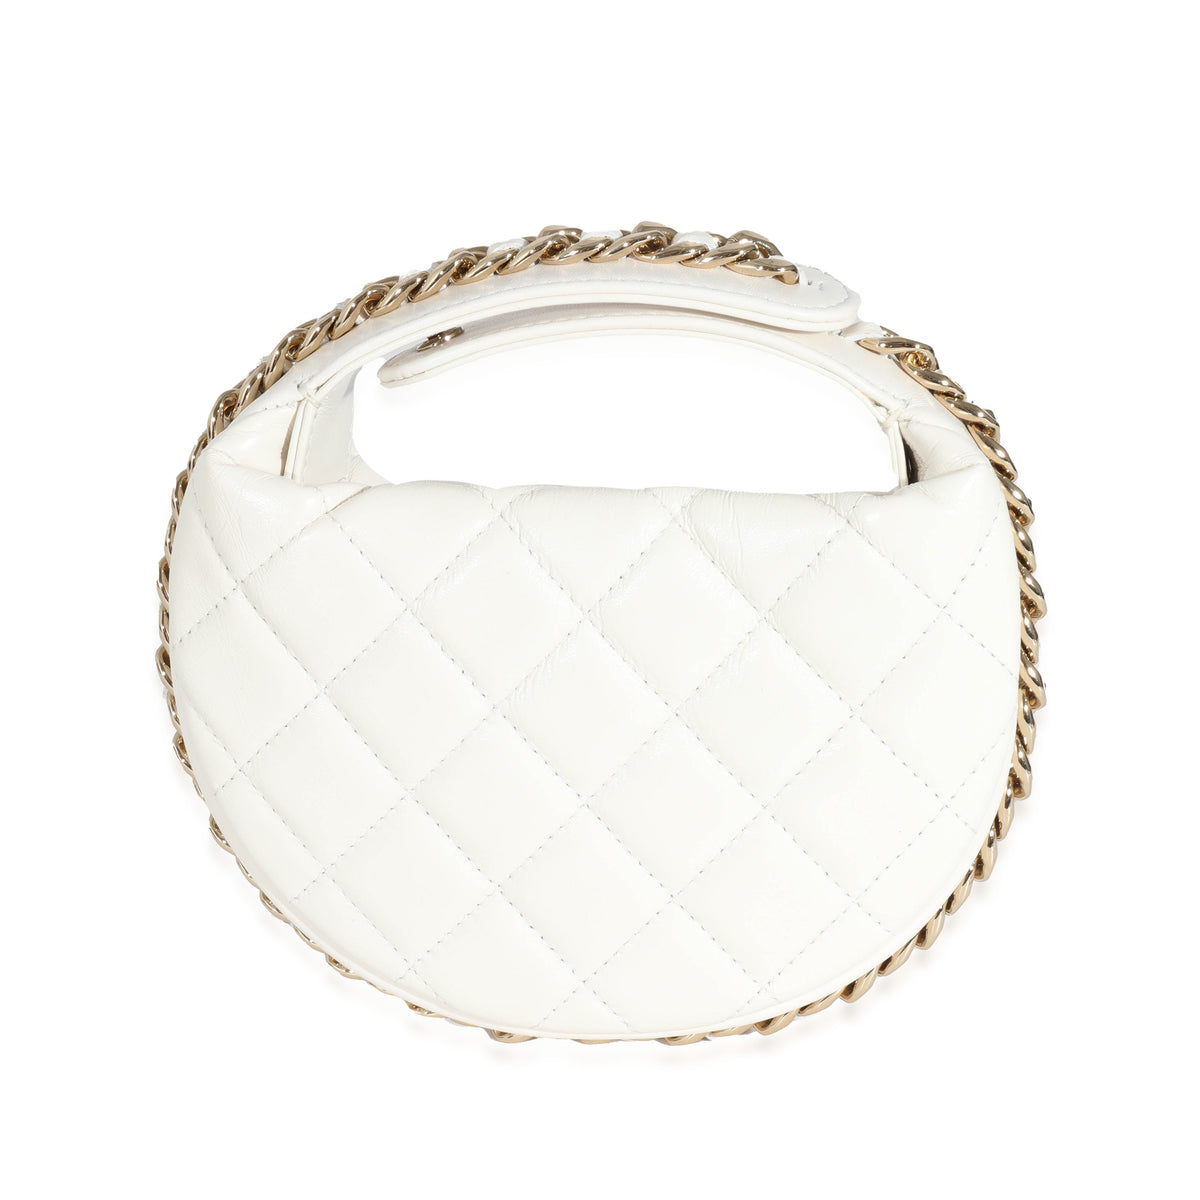 The Ultimate Guide to the Chanel Boy Bag - Academy by FASHIONPHILE